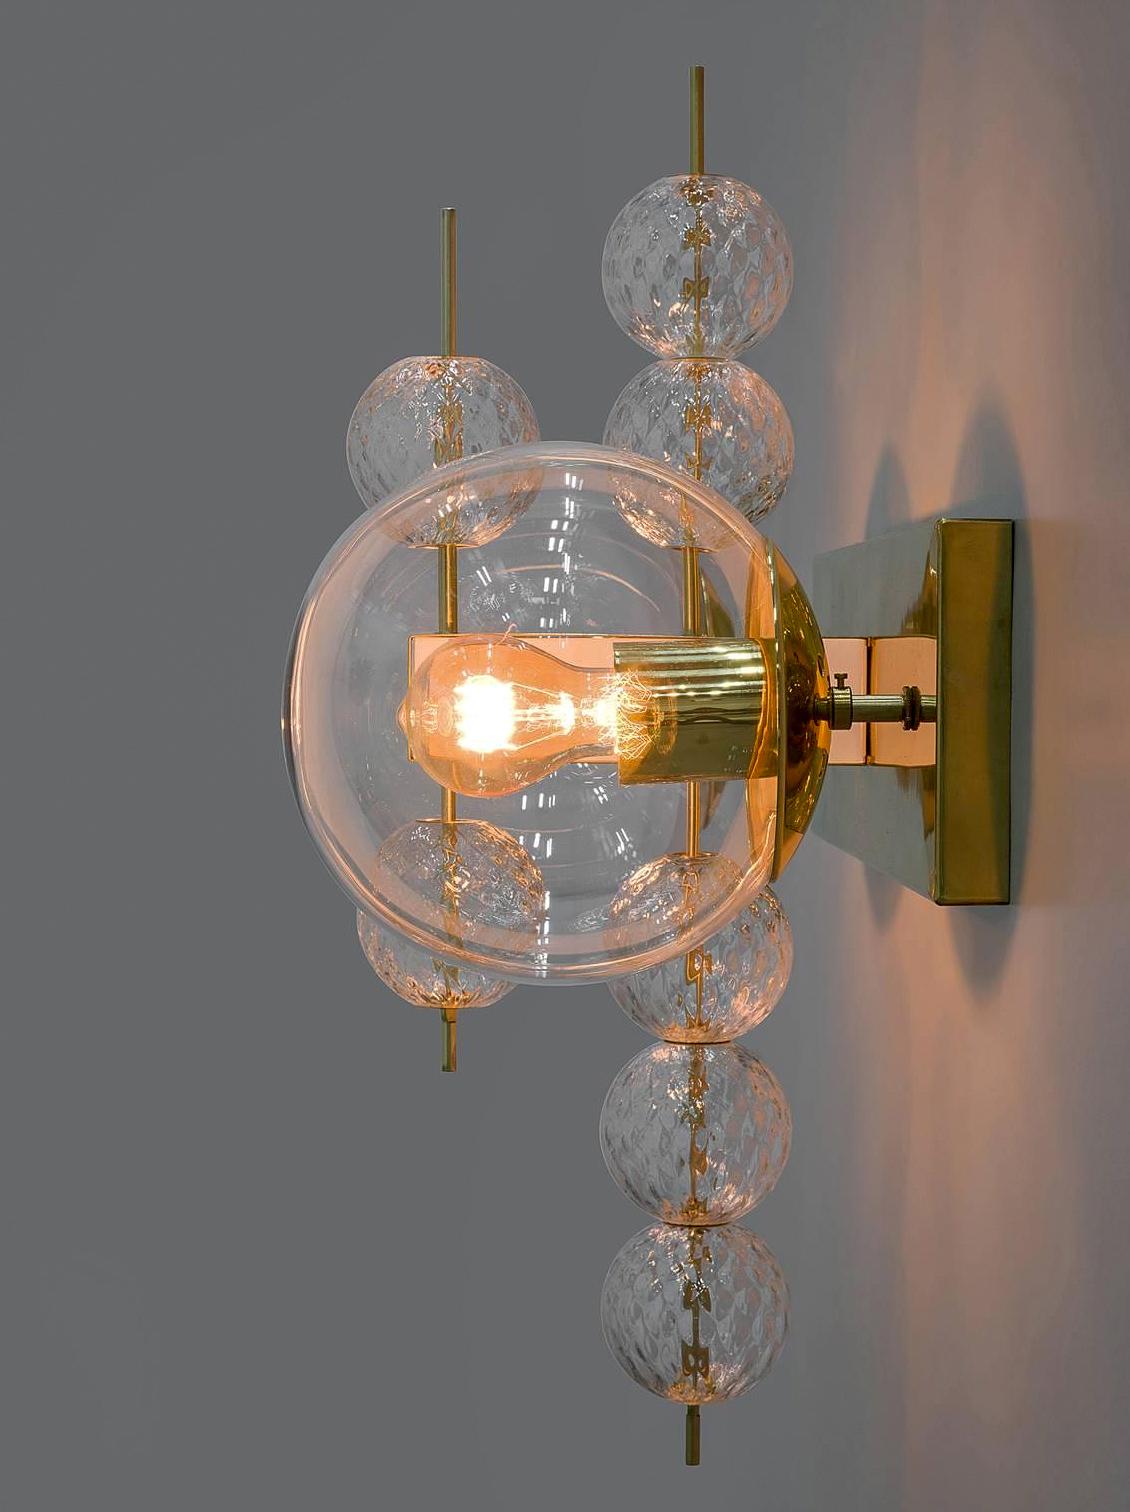 Midcentury Hotel Wall Chandelier with Brass Fixture, European, 1970s For Sale 1